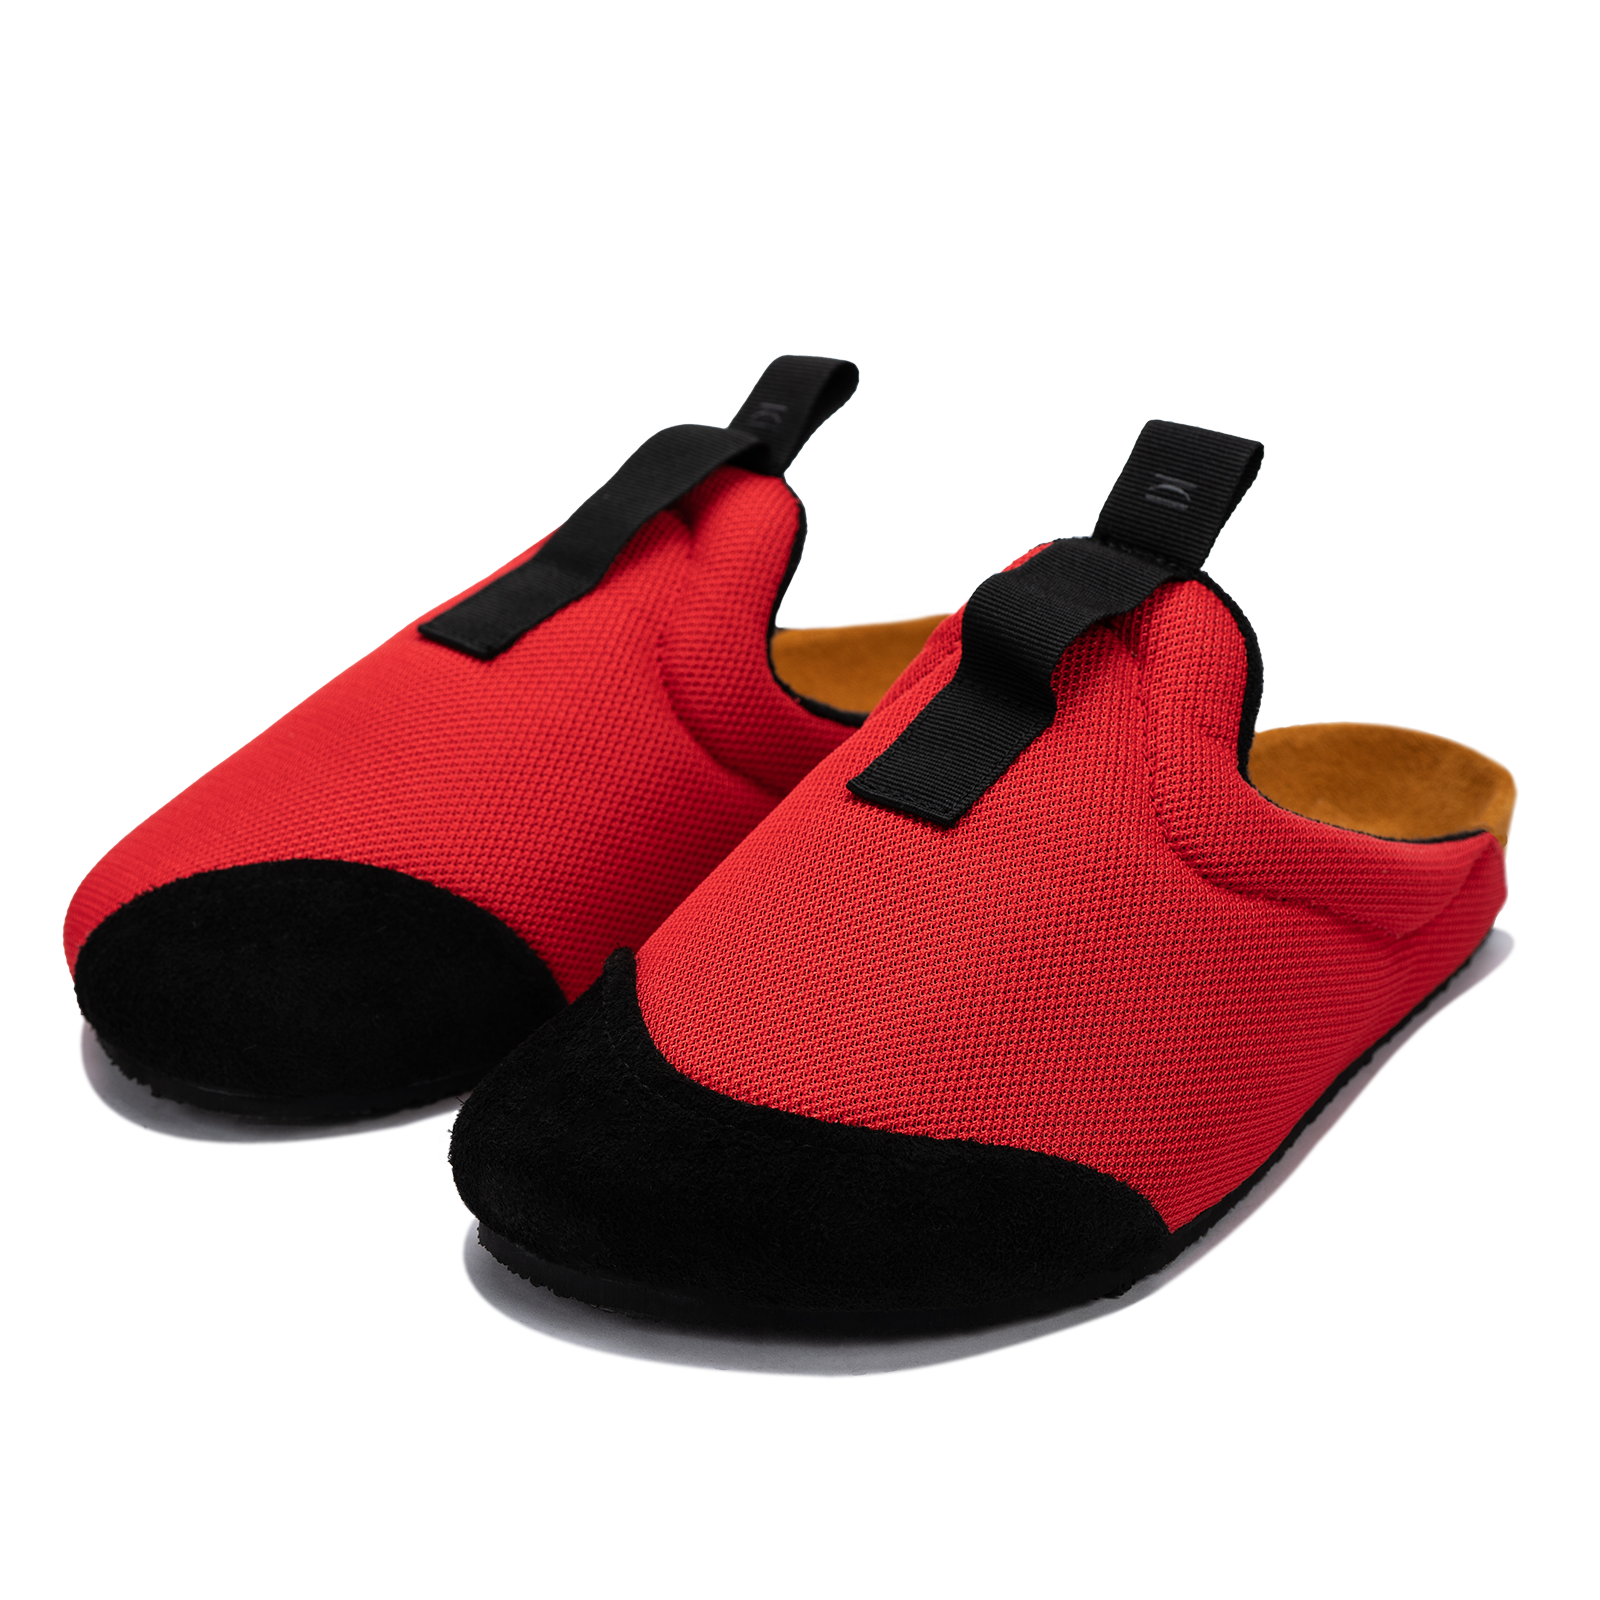 other 3/4 view antha 2.0 Red is a Mule made of red mesh with a Black hairy suede to overlay, cork midsole with suede top lining Black VIbram rubber bottom and woven top pull